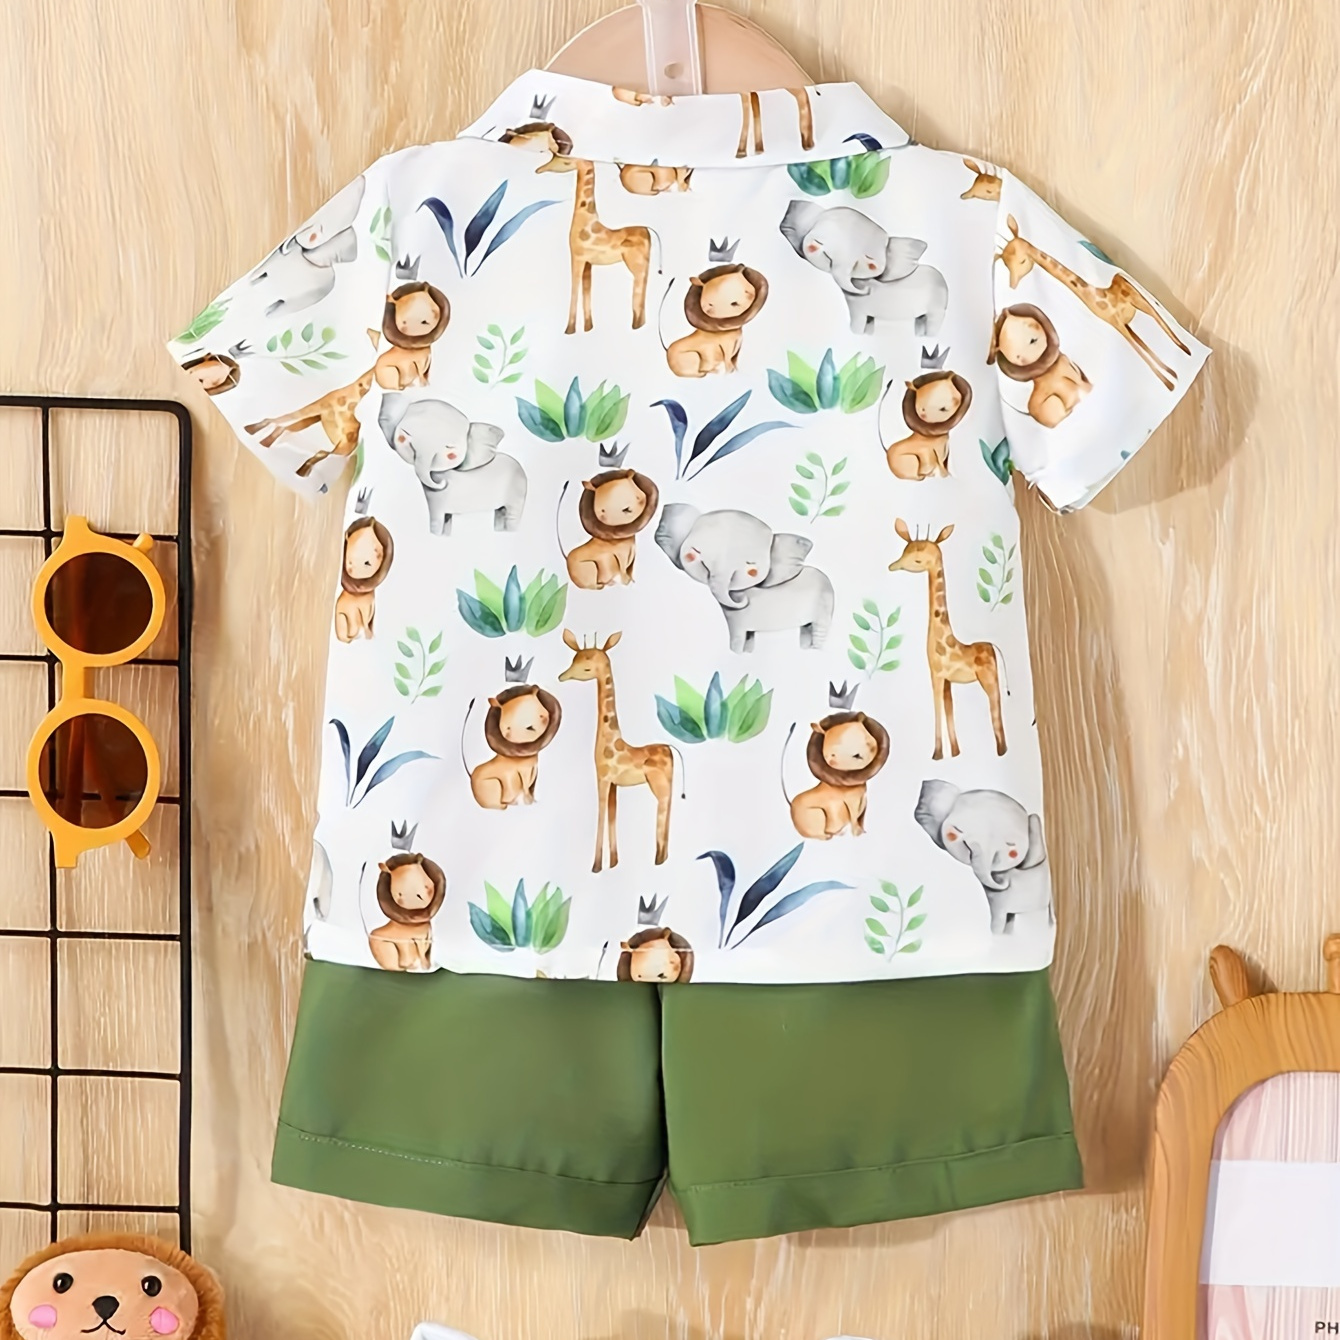 

2pcs Infant & Toddler's Elephant Lion Print Casual Outfit, Short Sleeve Shirt & Elastic Waist Shorts, Baby Boy's Clothes For Summer Beach Vacation Outings